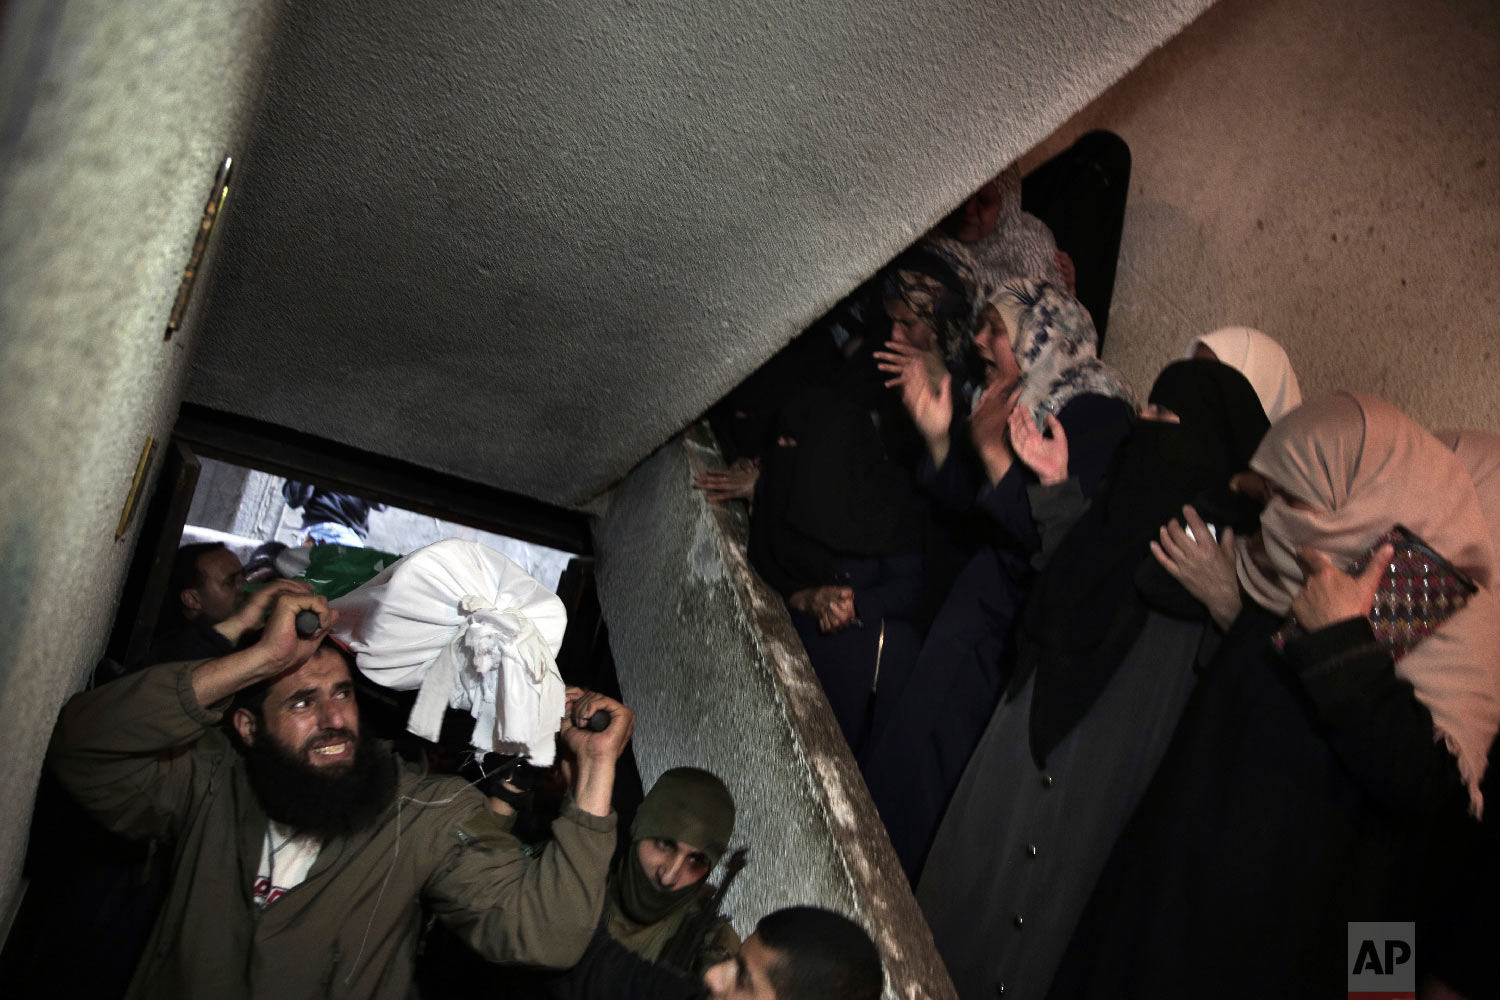  Relatives of Palestinian Ziyad Al-hawajri, react as mourners carry his body into the family house during his funeral in Nuseirat, central Gaza Strip, Thursday, March 22, 2018. Al-hawajri, is one of the two members of Hamas security forces who were k